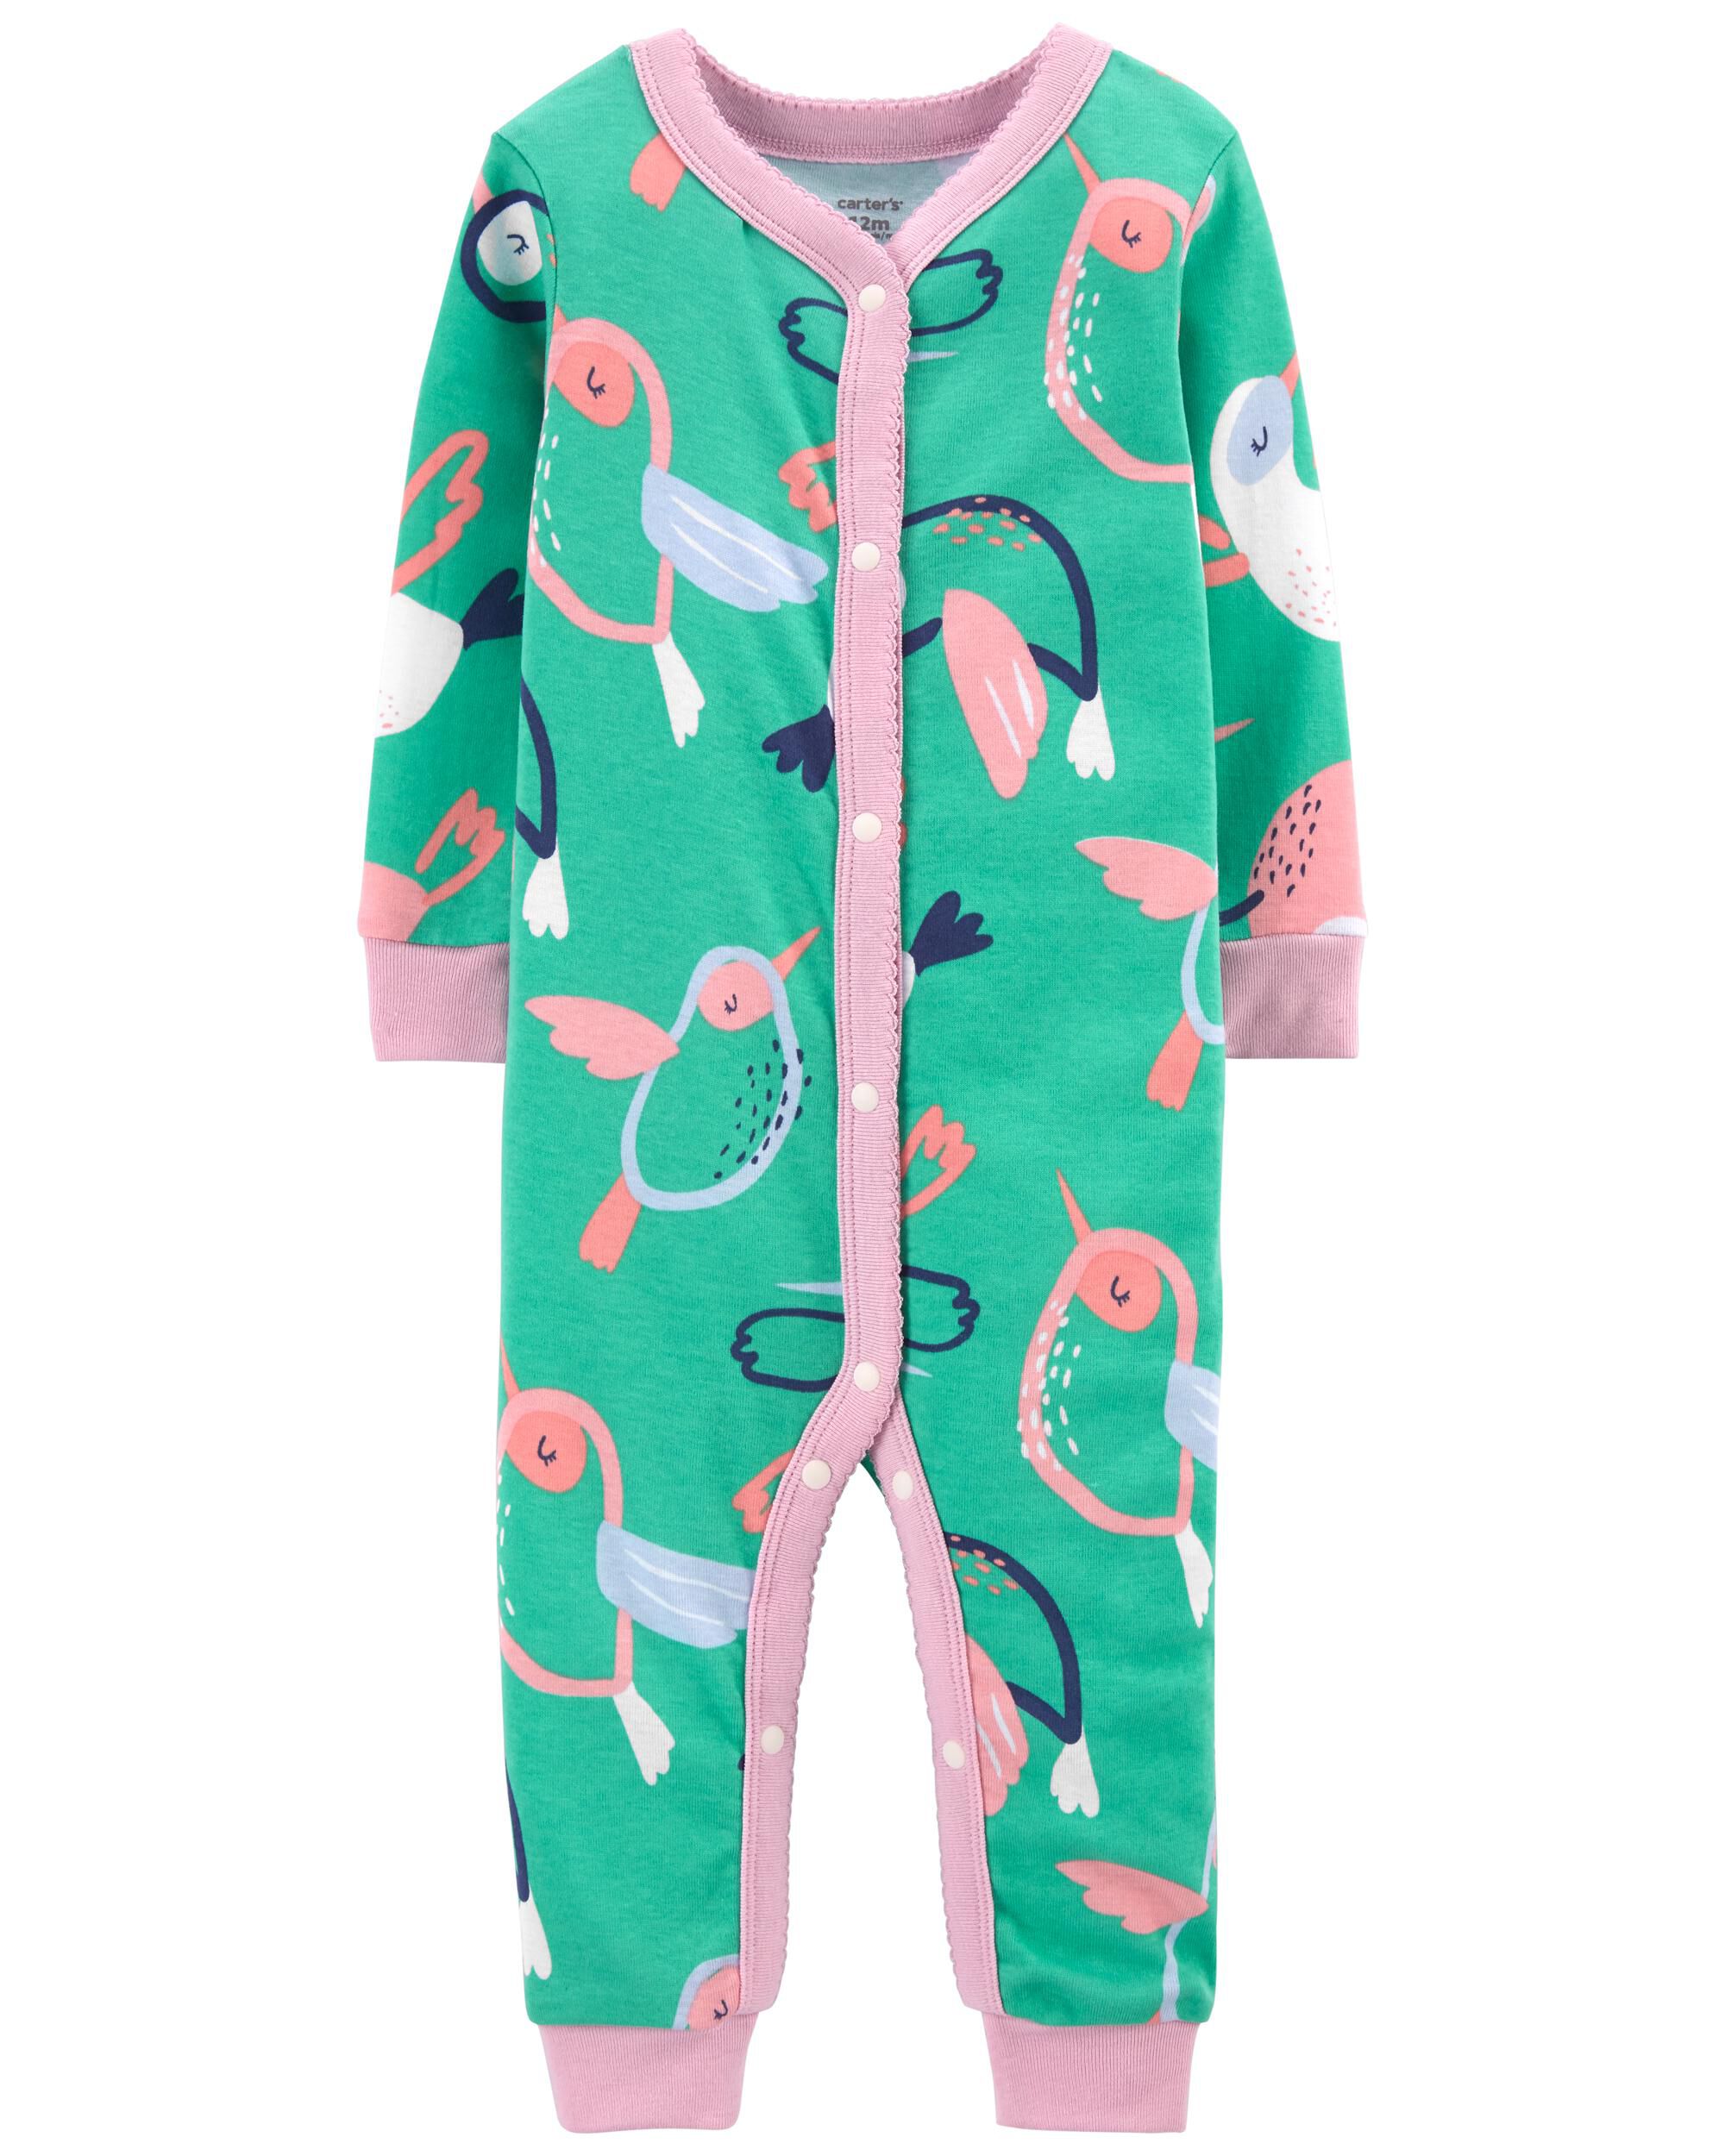 Baby Girls Footed Pajamas 3-Pack Cotton Infant Overall Sleeper and Play